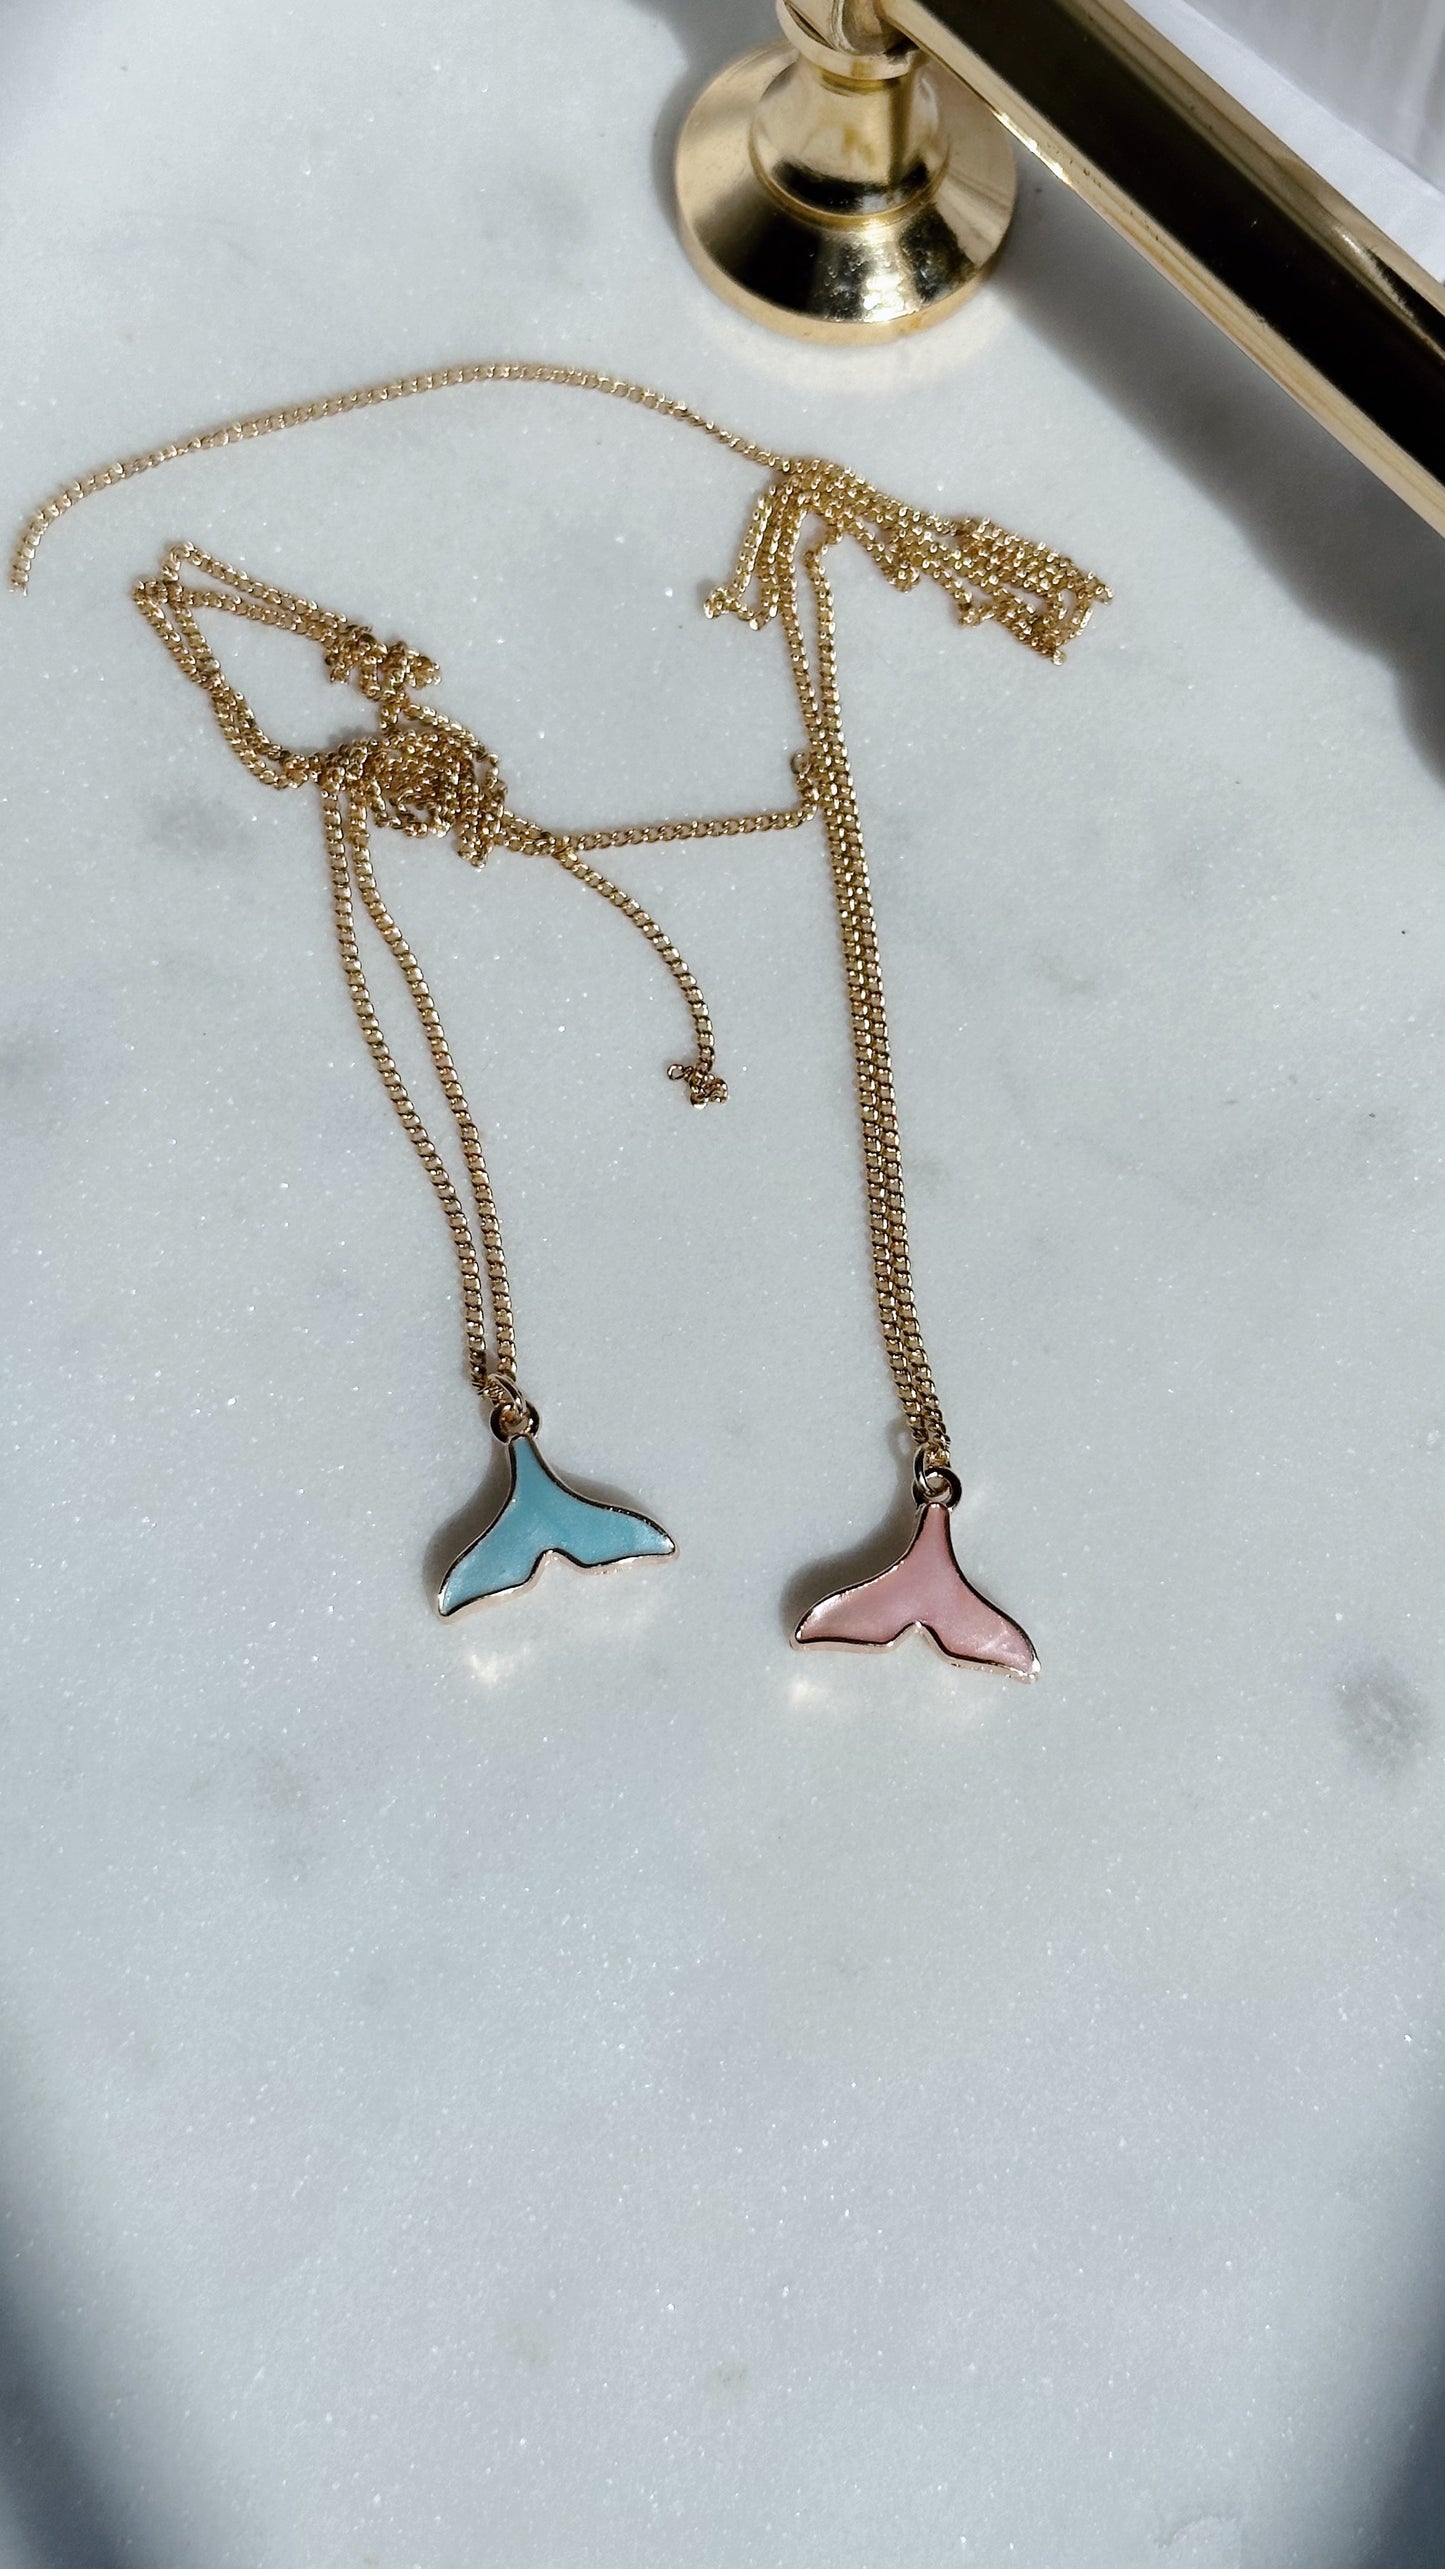 Mermaid tail necklace